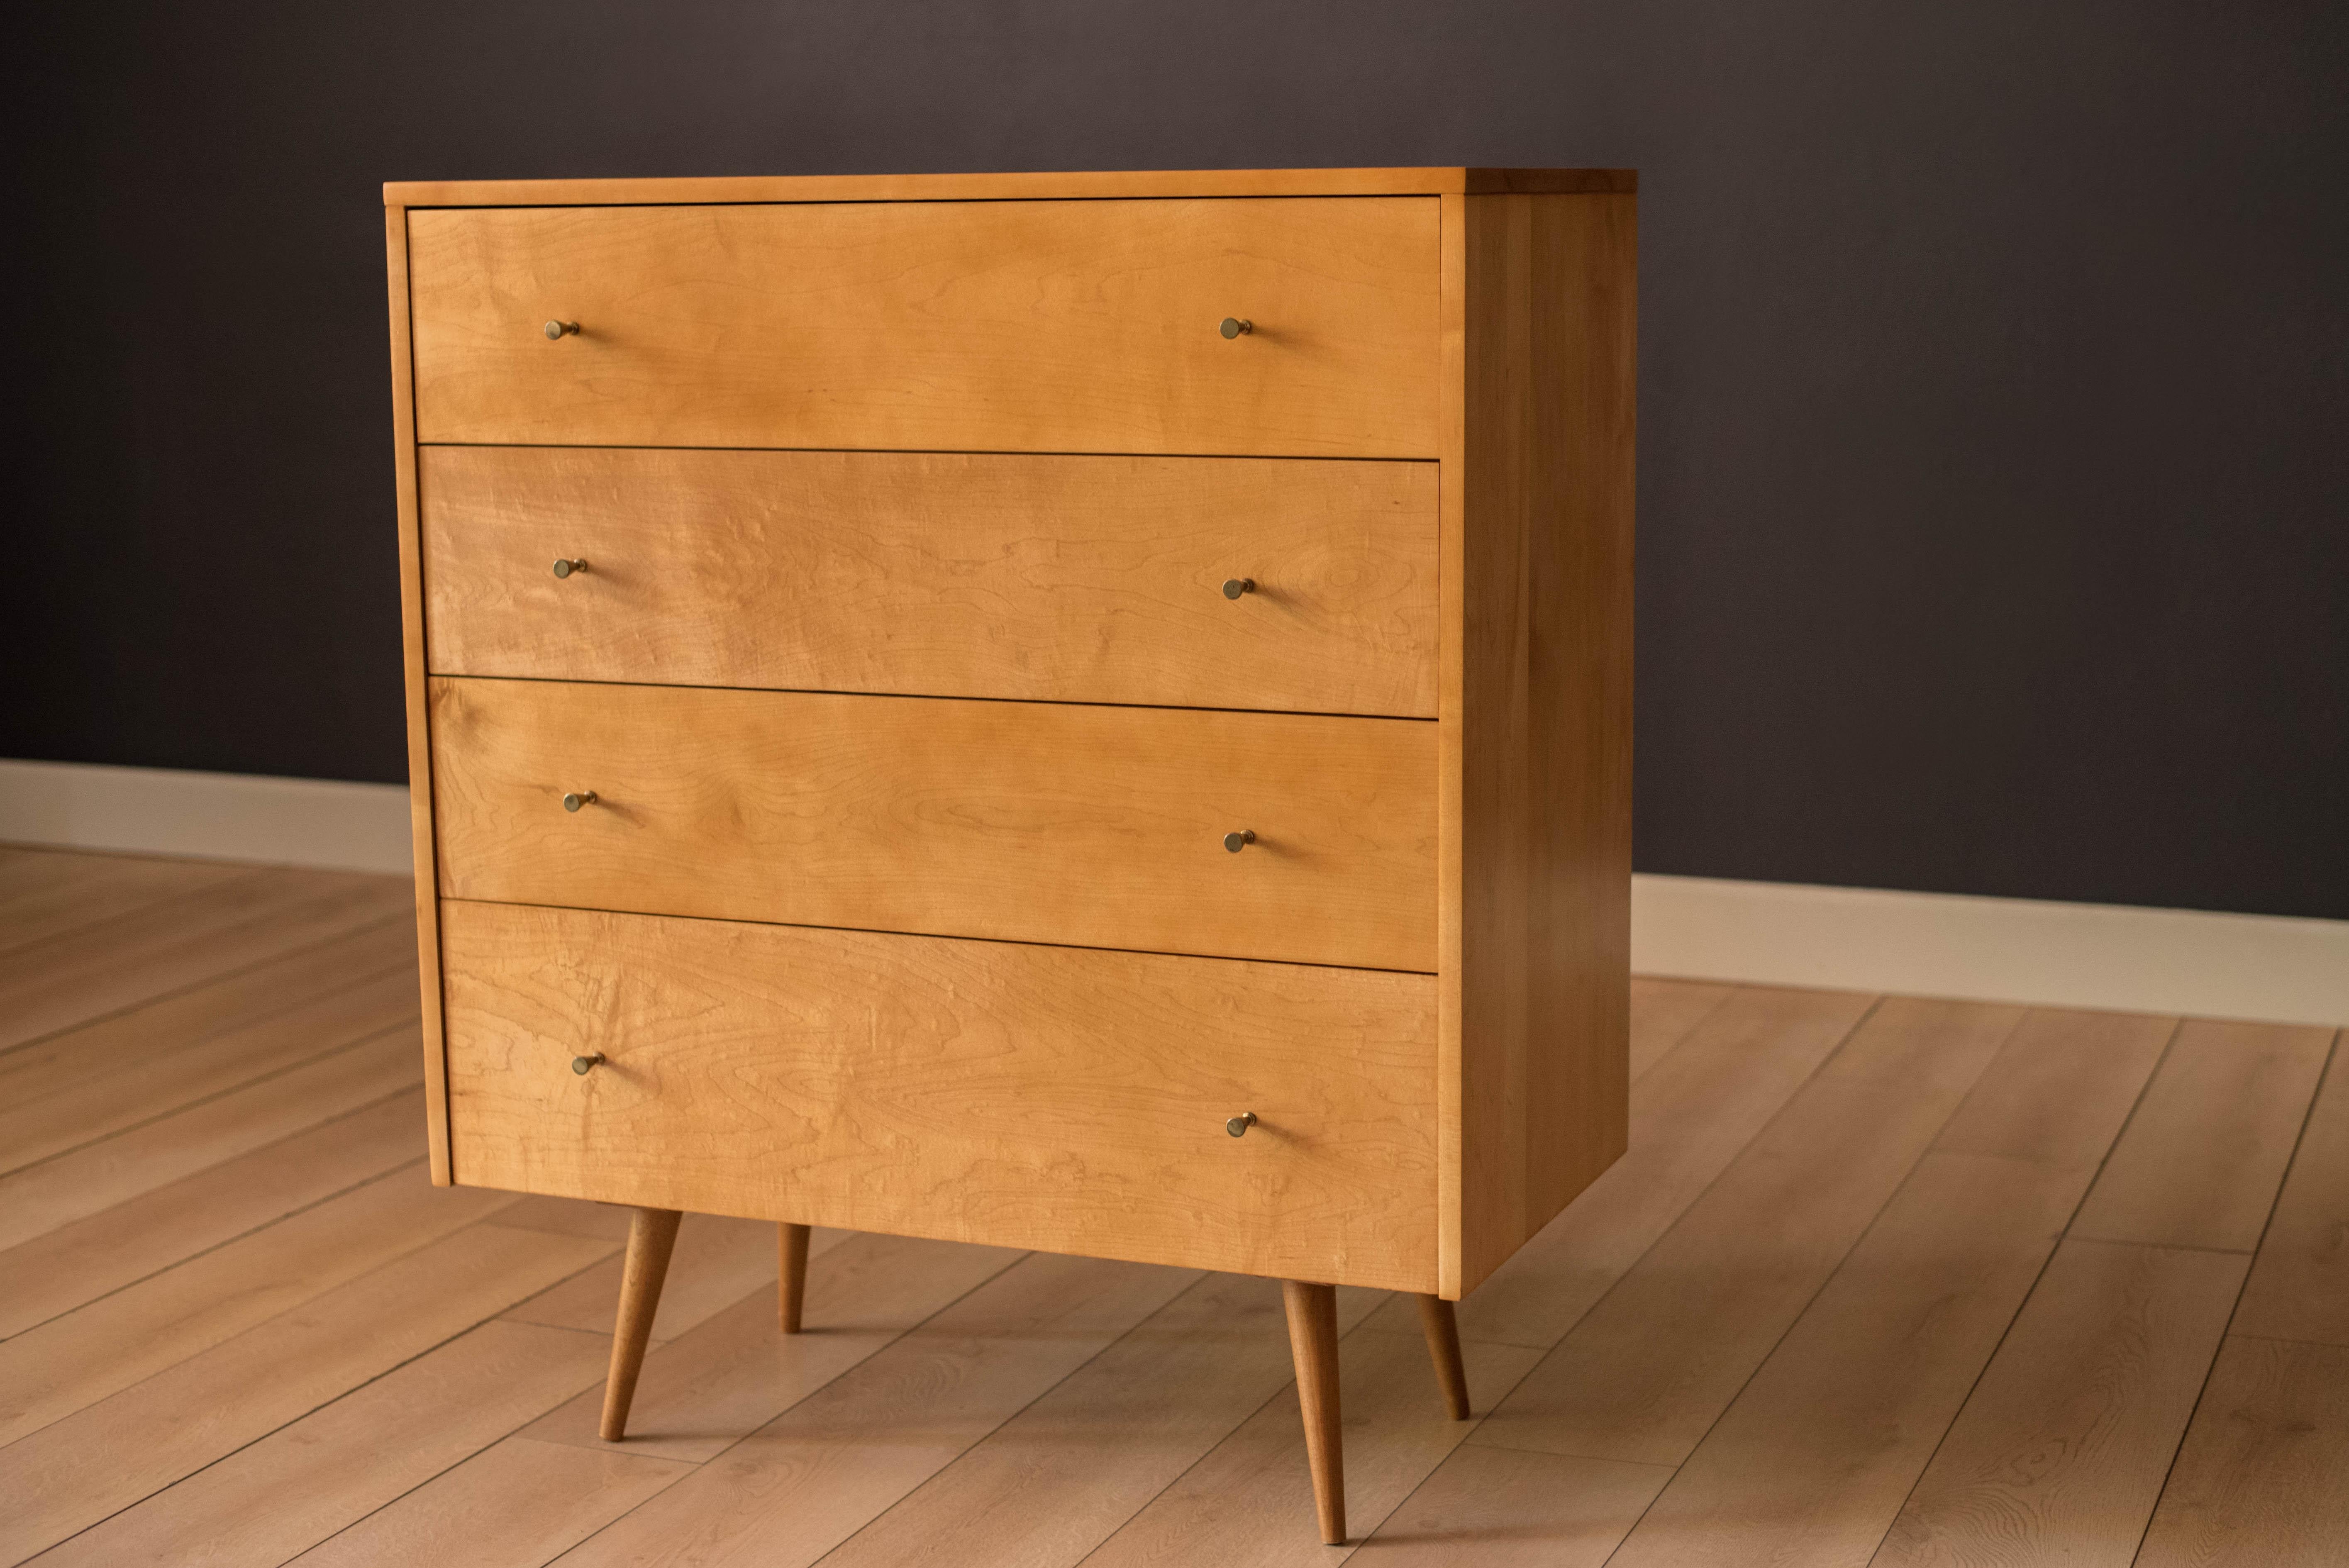 Vintage tall dresser chest in solid planked maple designed by Paul McCobb for Winchendon Furniture Co. circa 1950's. This piece offers plenty of storage including four deep drawers with the original signature brass hardware and splayed legs.